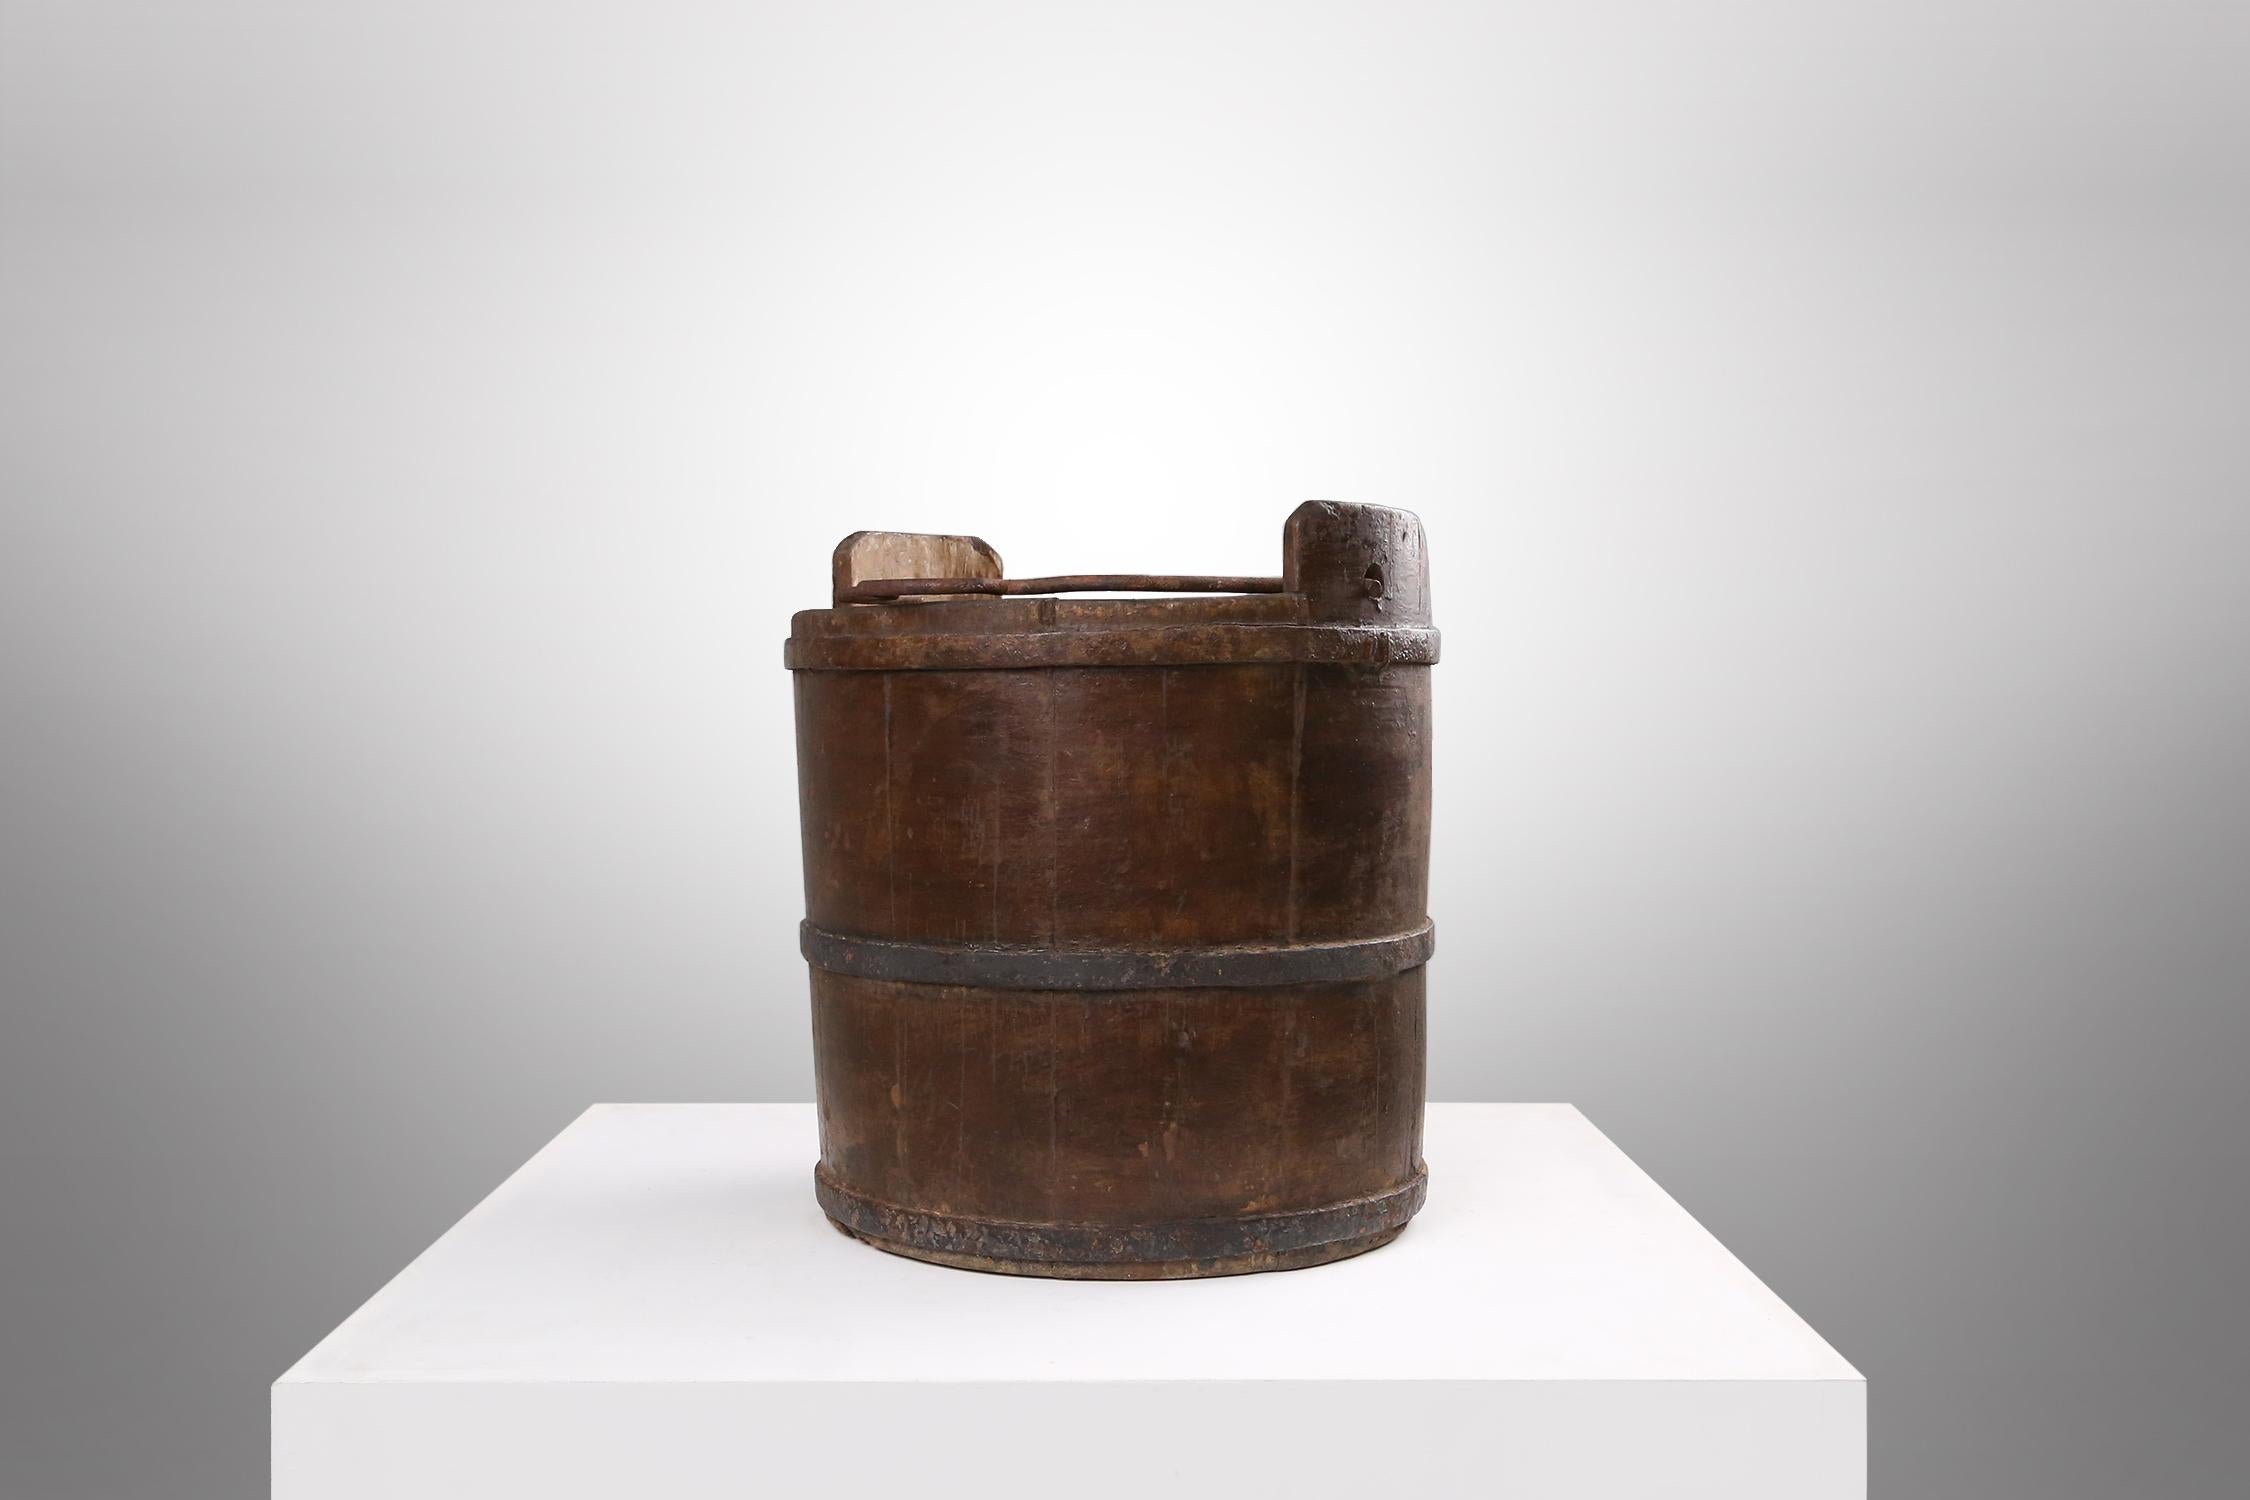 A nice wooden and wrought iron water, grain bucket, fabulous patina on the wood, circa 1860. with handles is on both sides and a raised hand center carrier, triple banded iron slats for the individual wood slats.